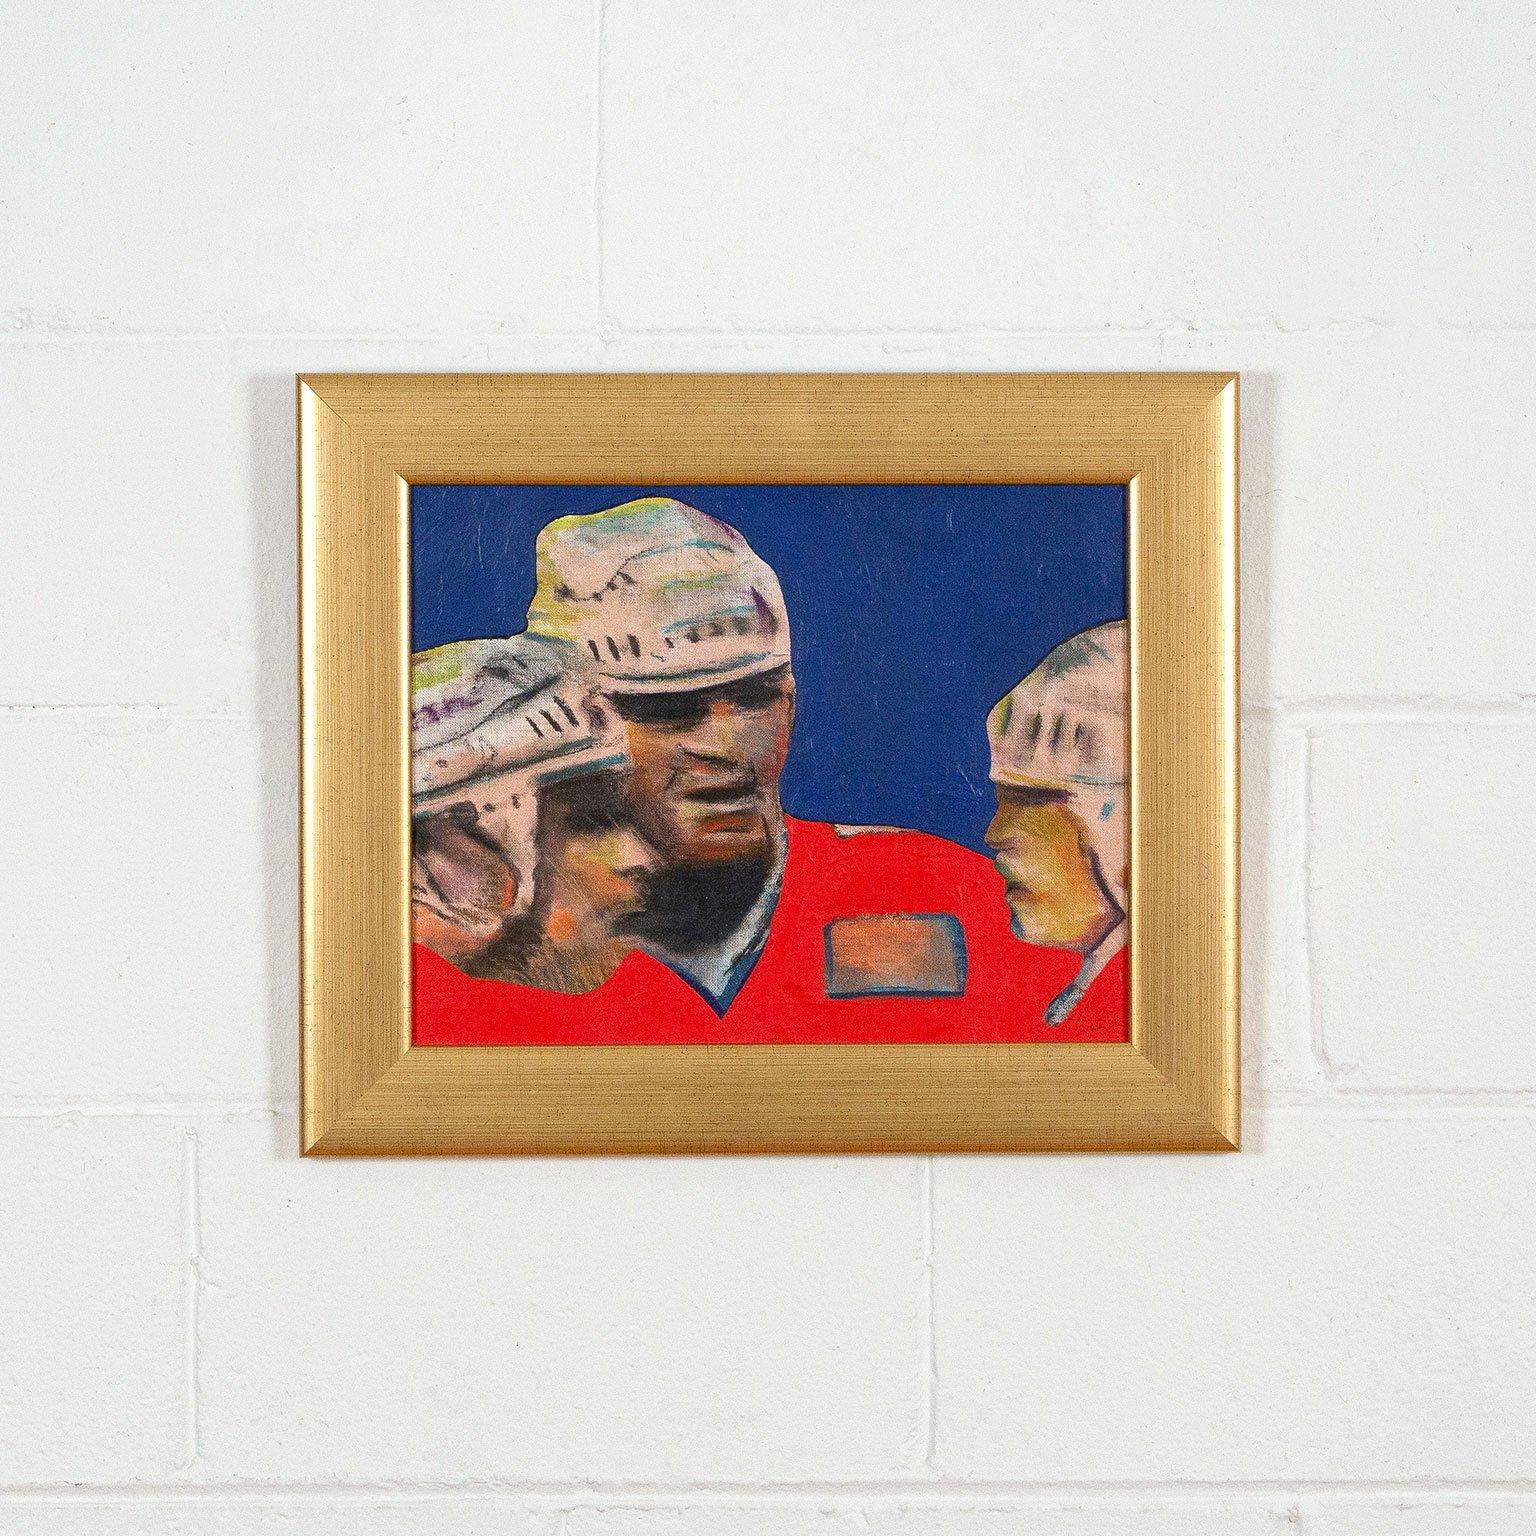 Hockey Knights - Painting by Charles Pachter